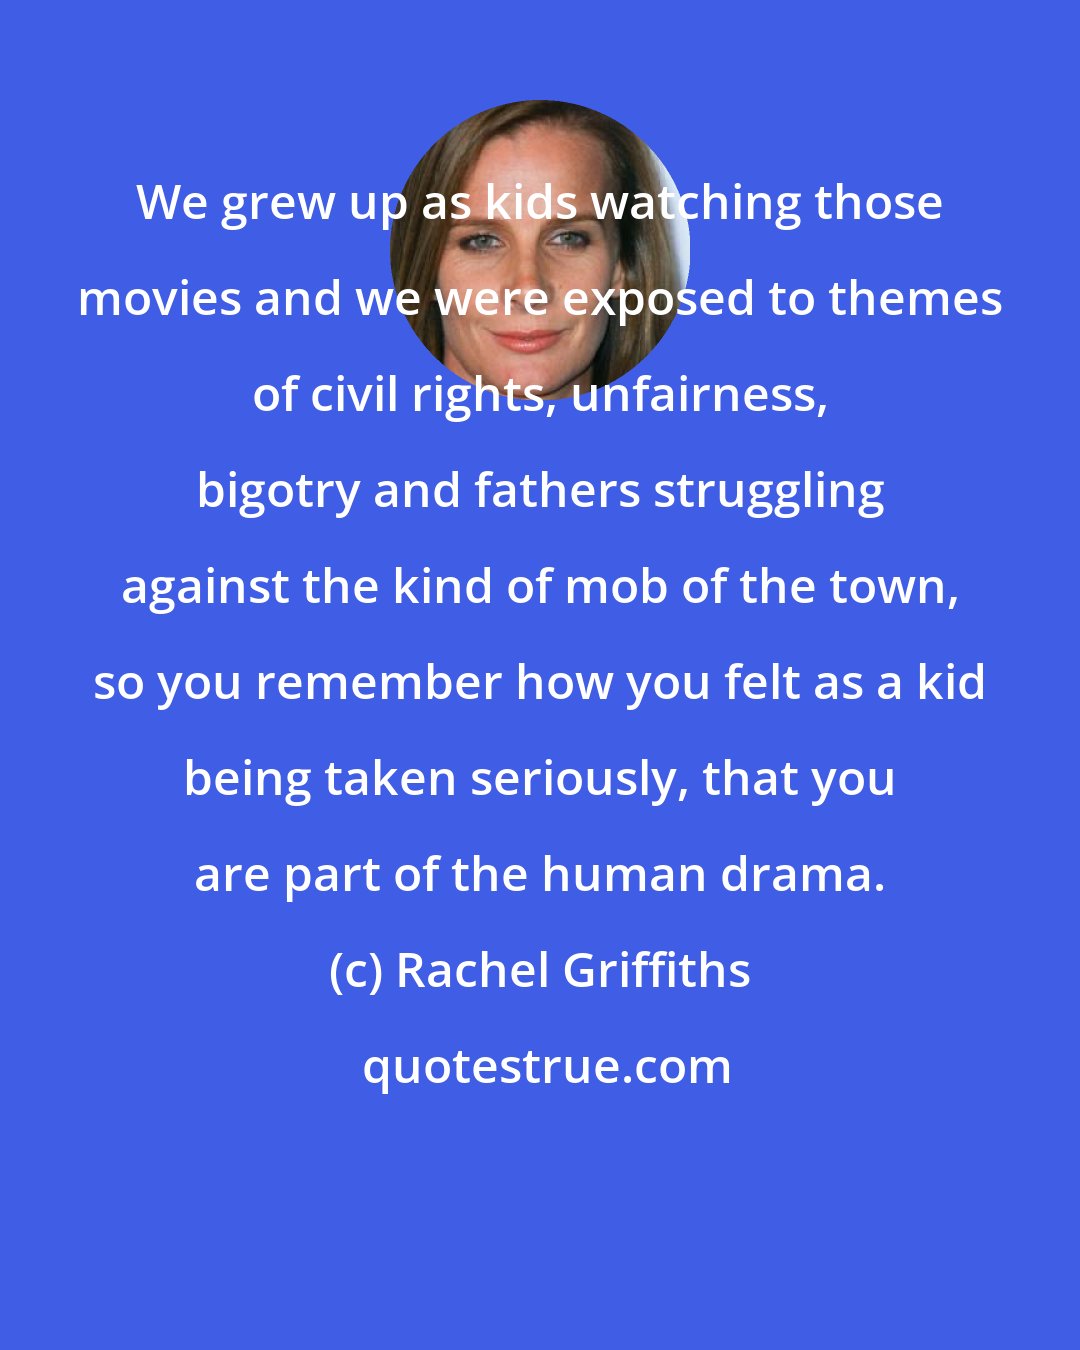 Rachel Griffiths: We grew up as kids watching those movies and we were exposed to themes of civil rights, unfairness, bigotry and fathers struggling against the kind of mob of the town, so you remember how you felt as a kid being taken seriously, that you are part of the human drama.